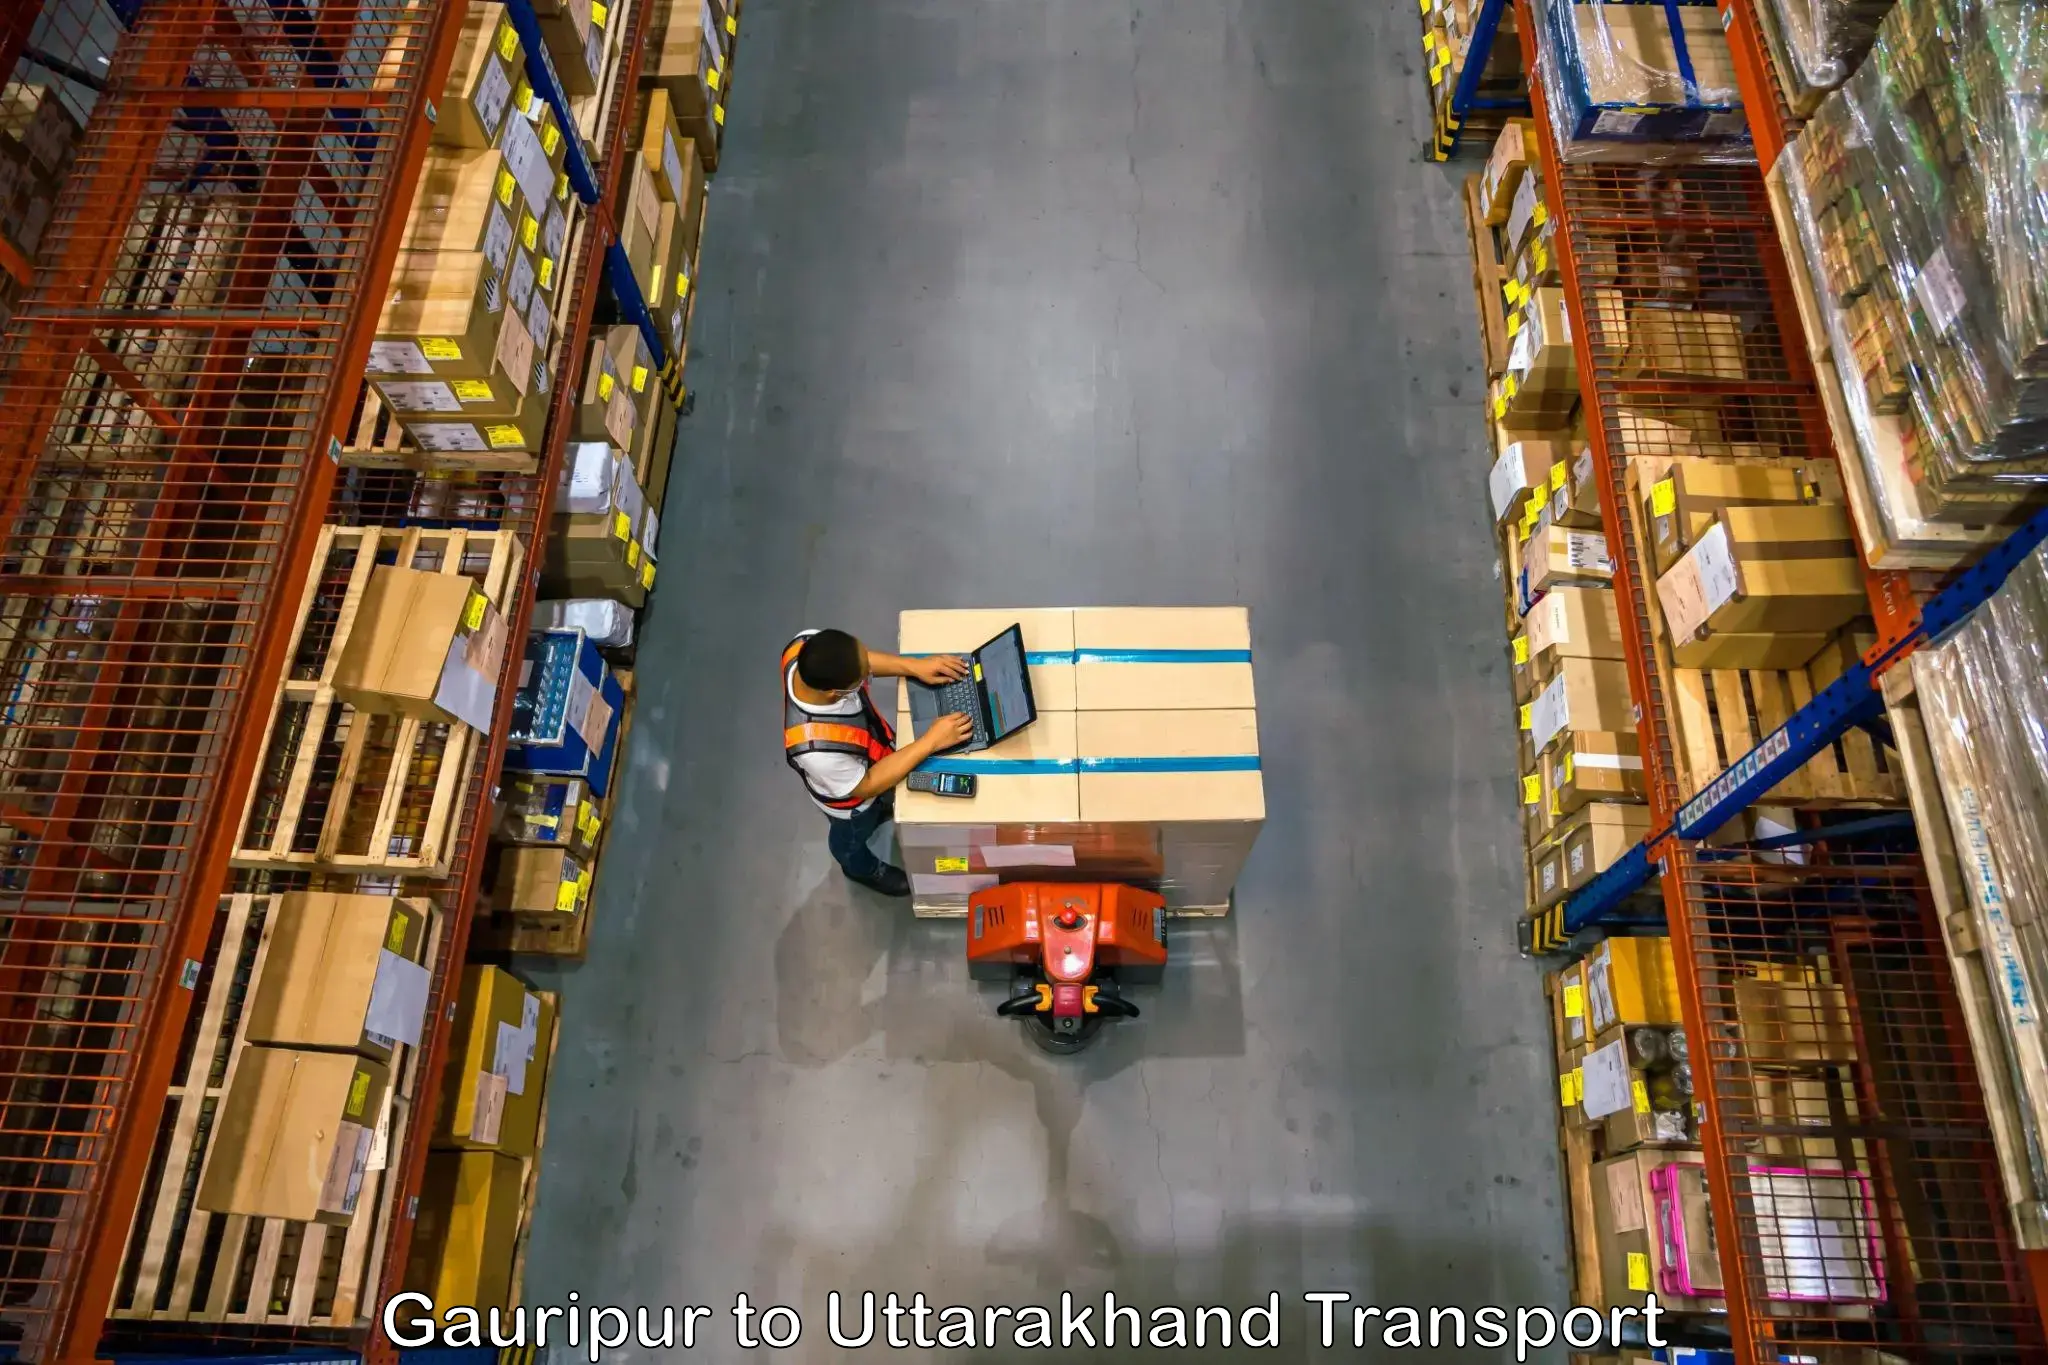 Lorry transport service Gauripur to Roorkee